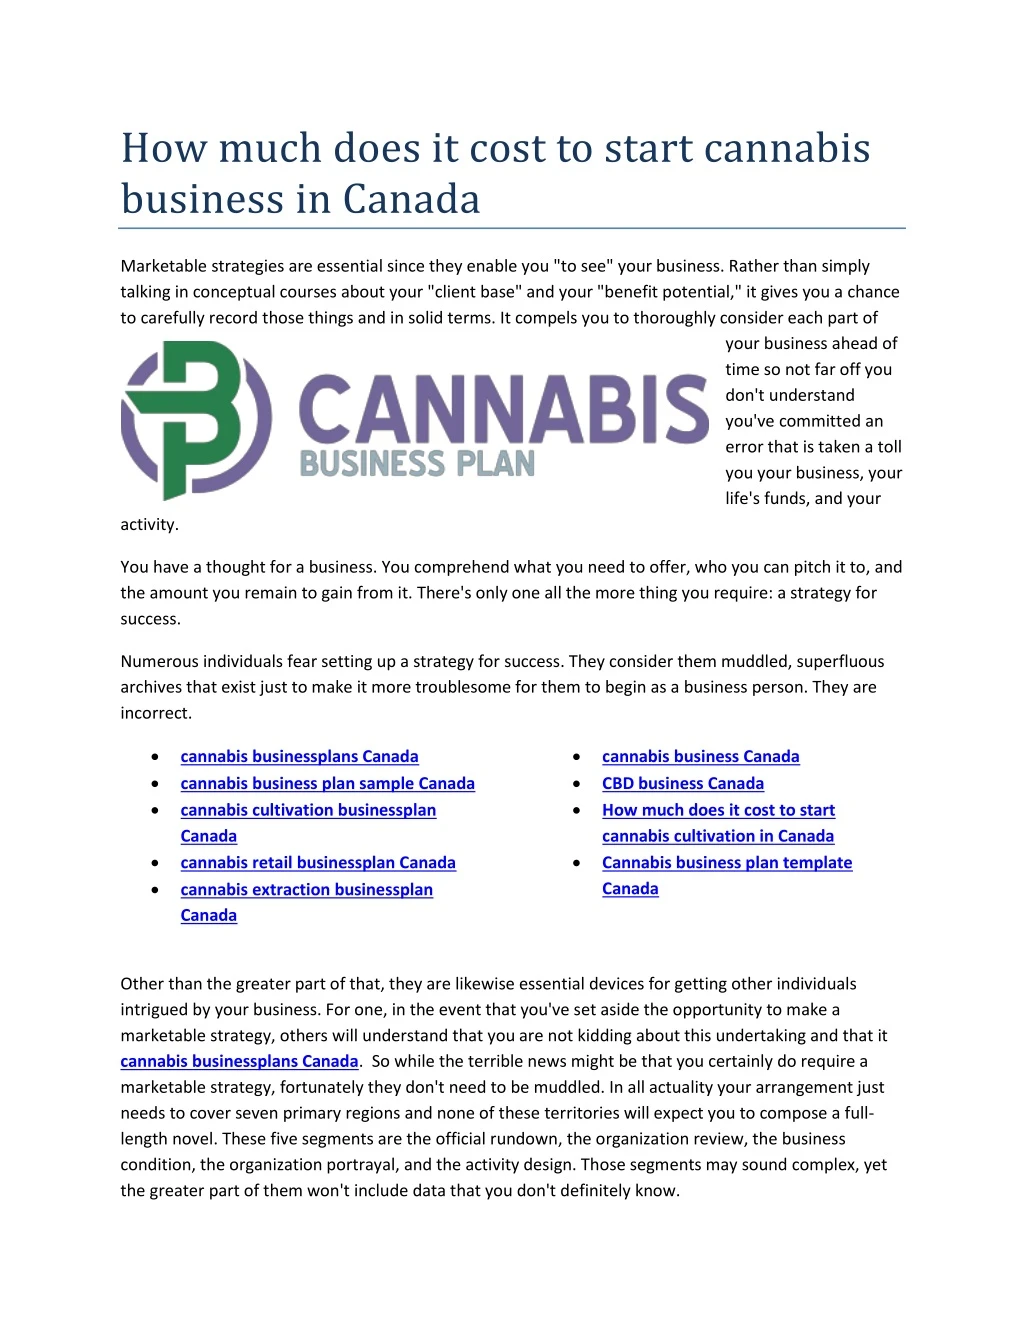 how much does it cost to start cannabis business